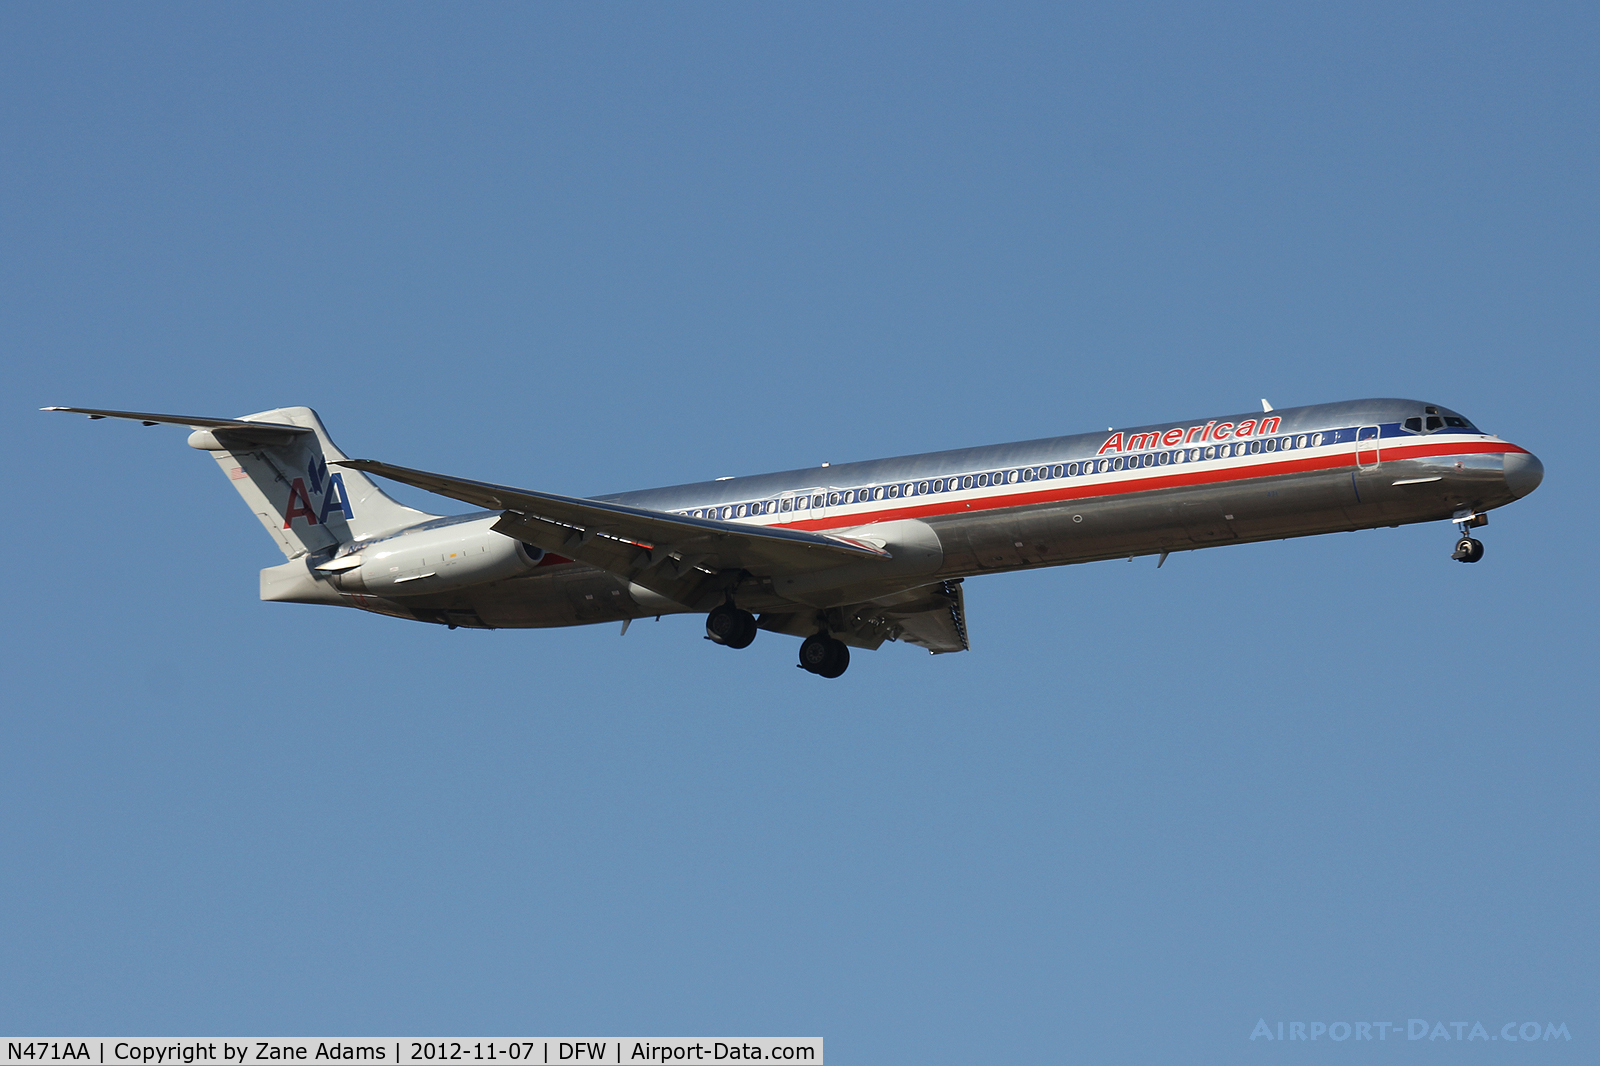 N471AA, 1988 McDonnell Douglas MD-82 (DC-9-82) C/N 49601, Landing at DFW Airport.